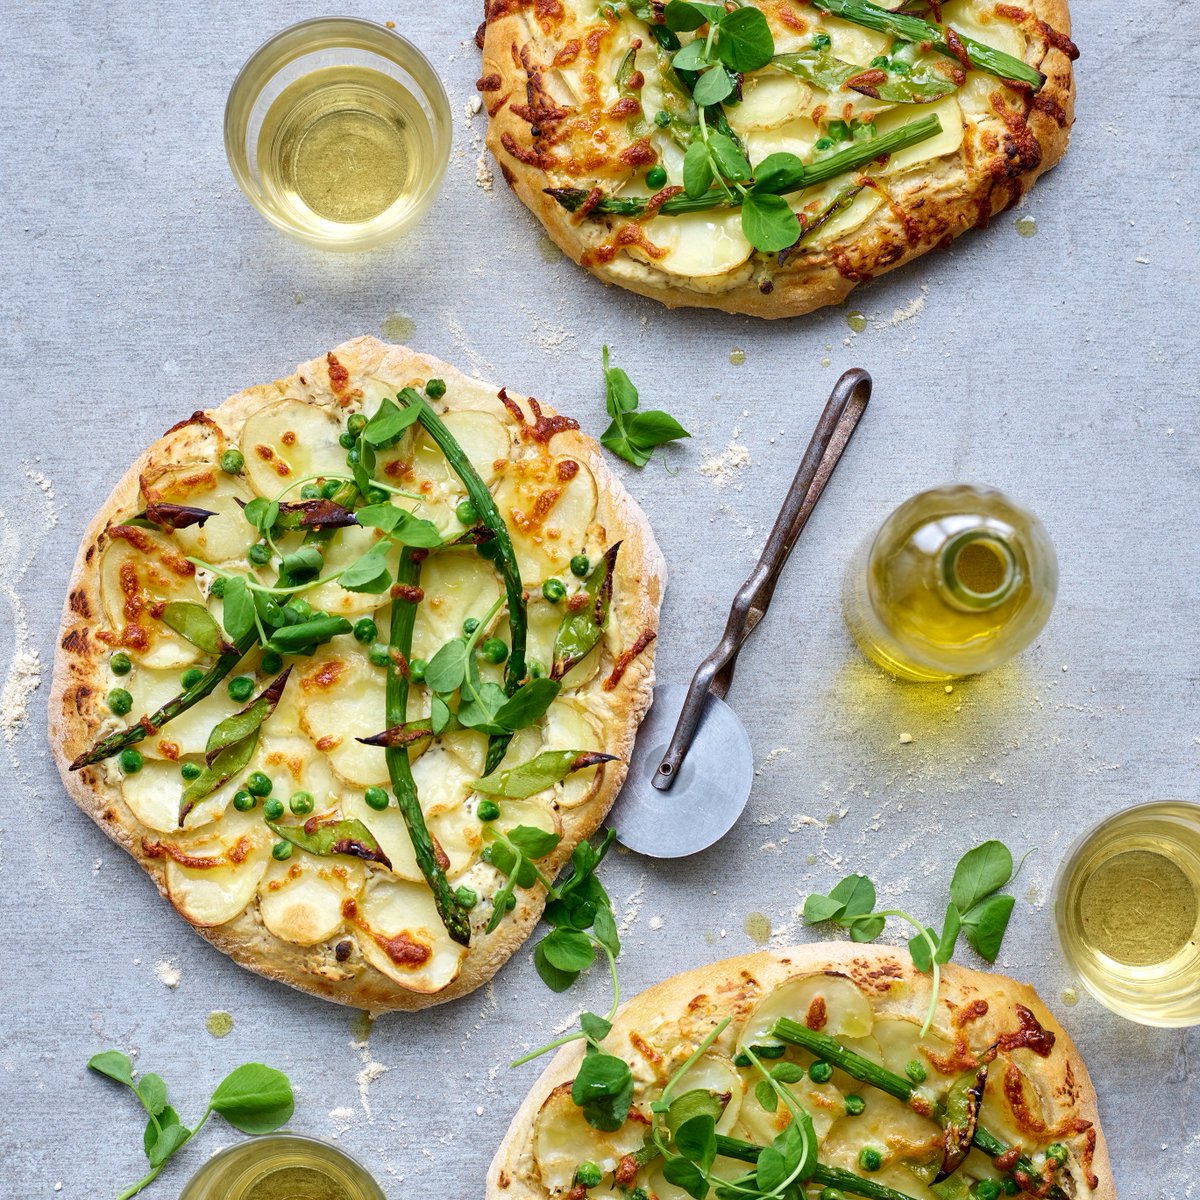 Spring offers an abundance of vibrant seasonal produce, meaning there are so many delicious pairings for #JerseyRoyals! Top your pizza with some of the season’s finest ingredients for a super fresh and flavoursome dinner. @yespeas #simplyseasonal #seasonalproduce